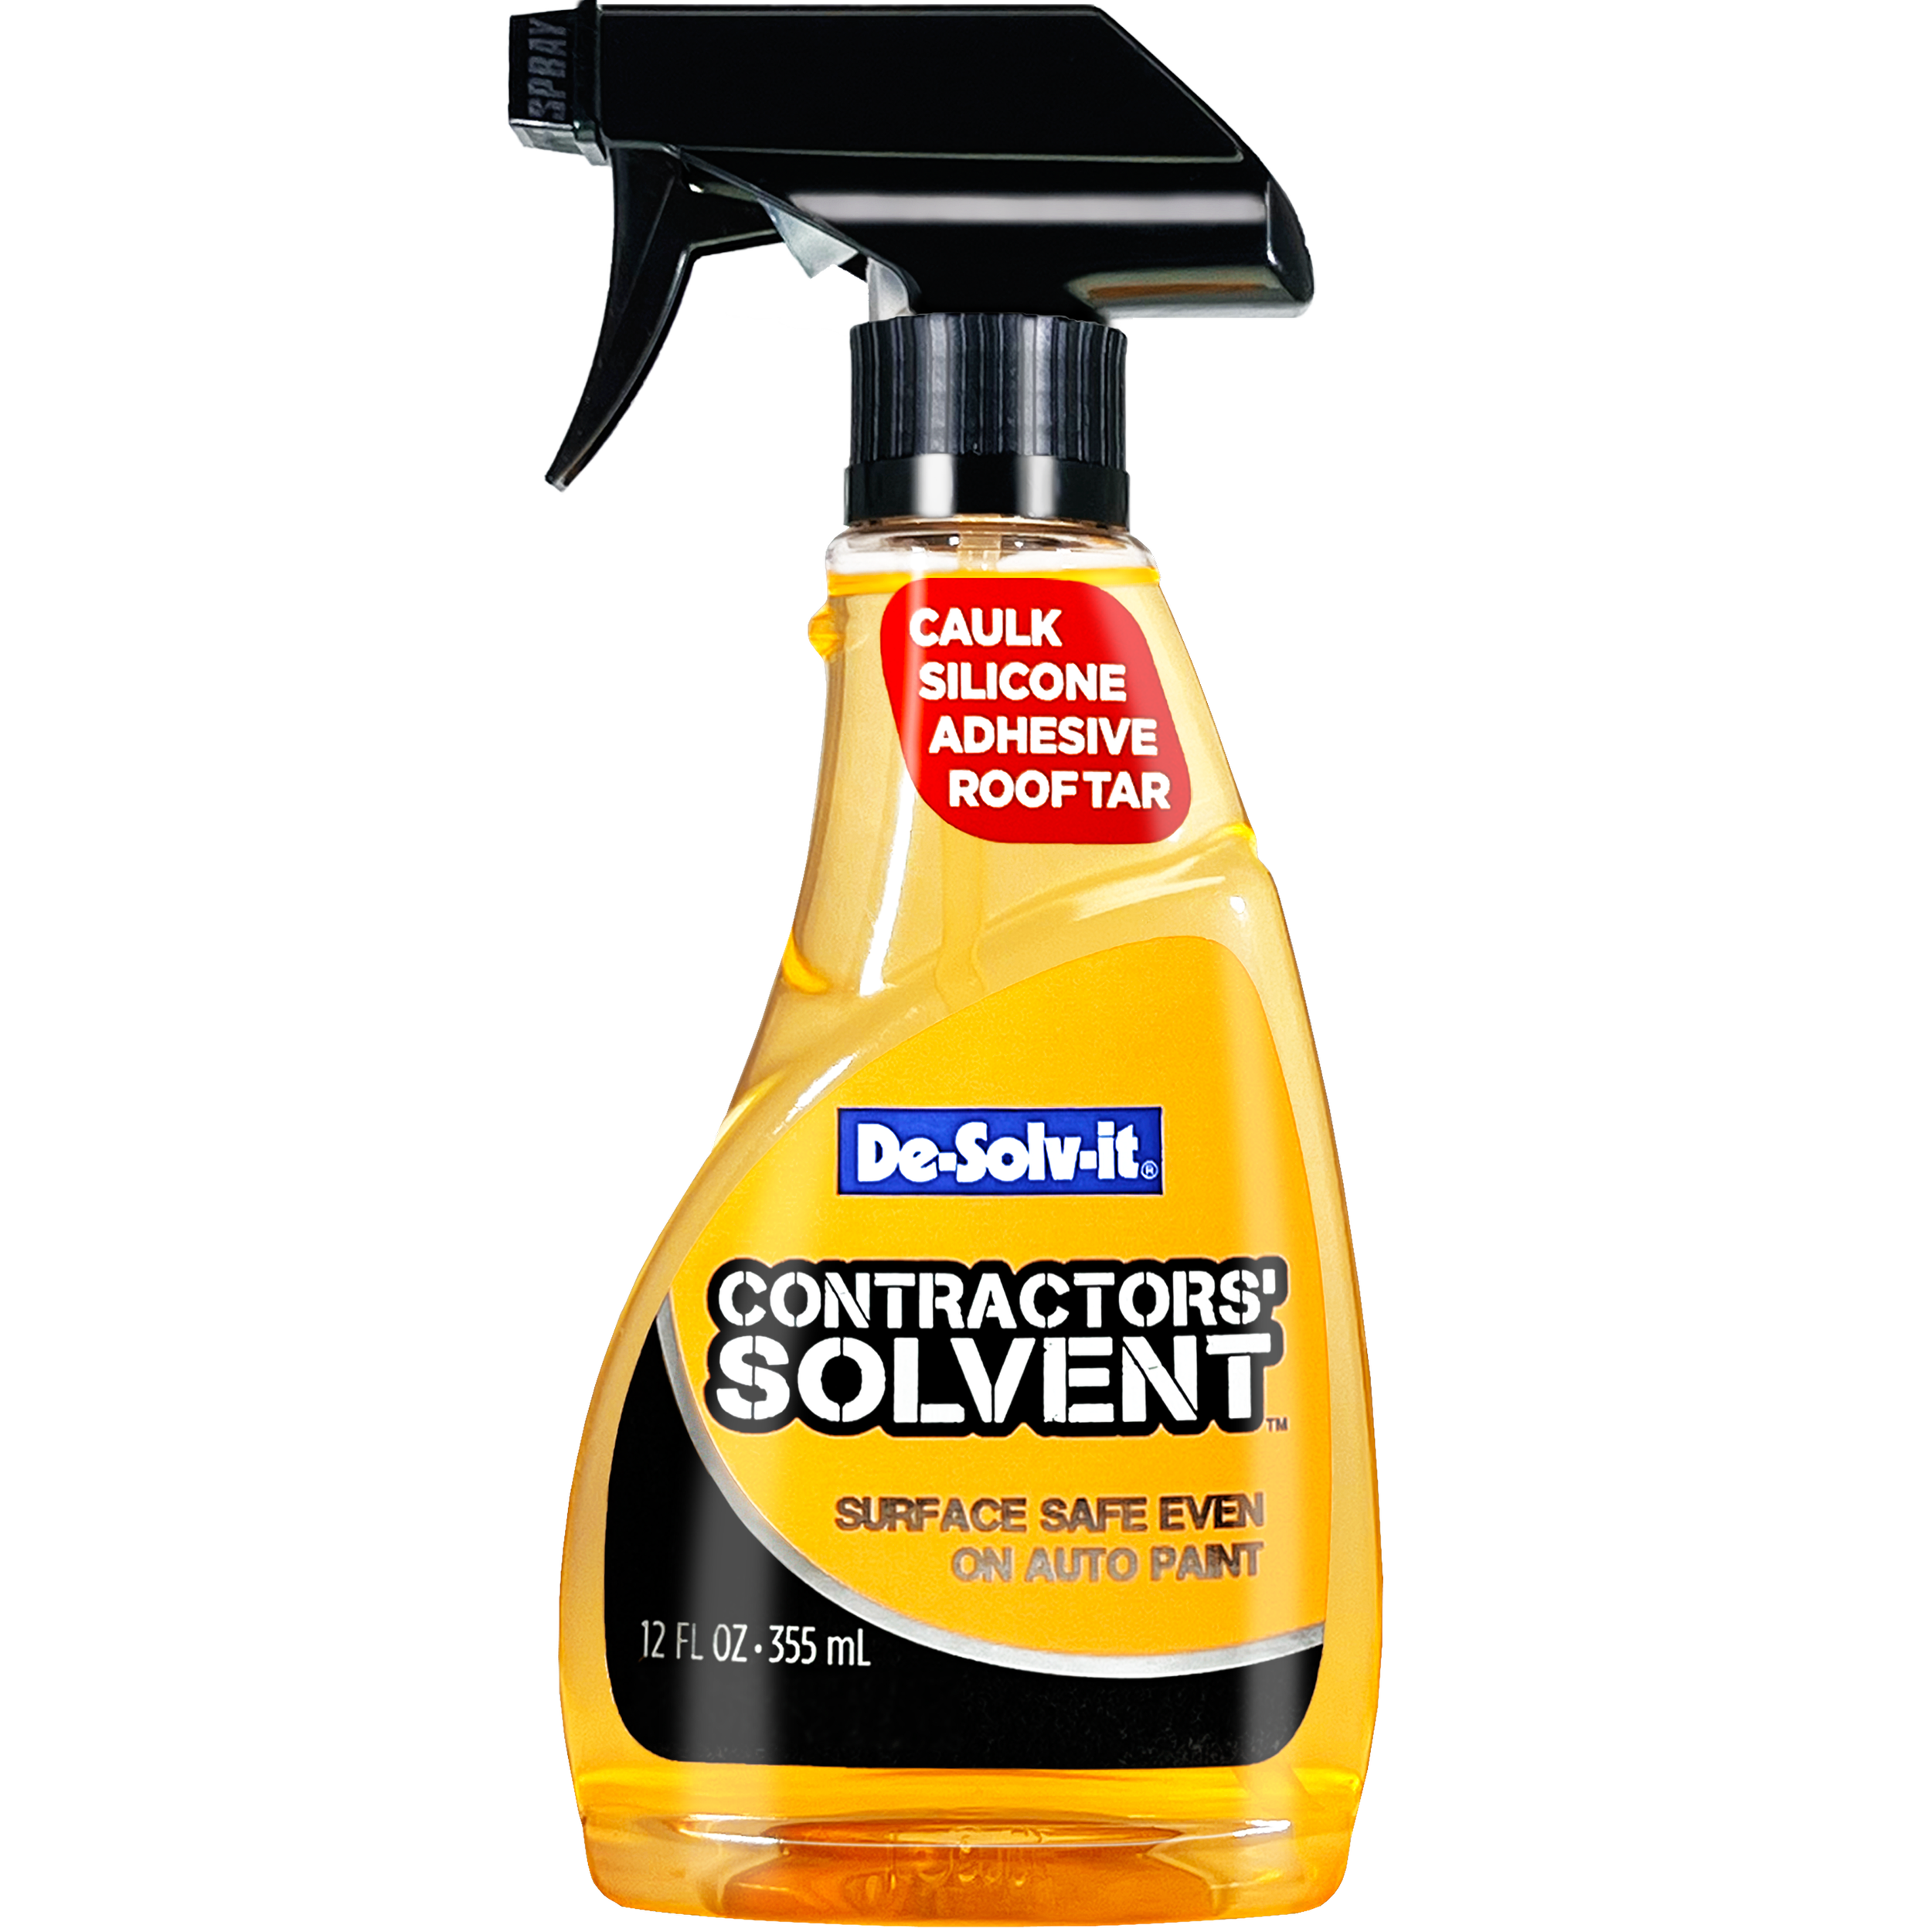 Adhesive Remover- Surface Solvent 5 gallon